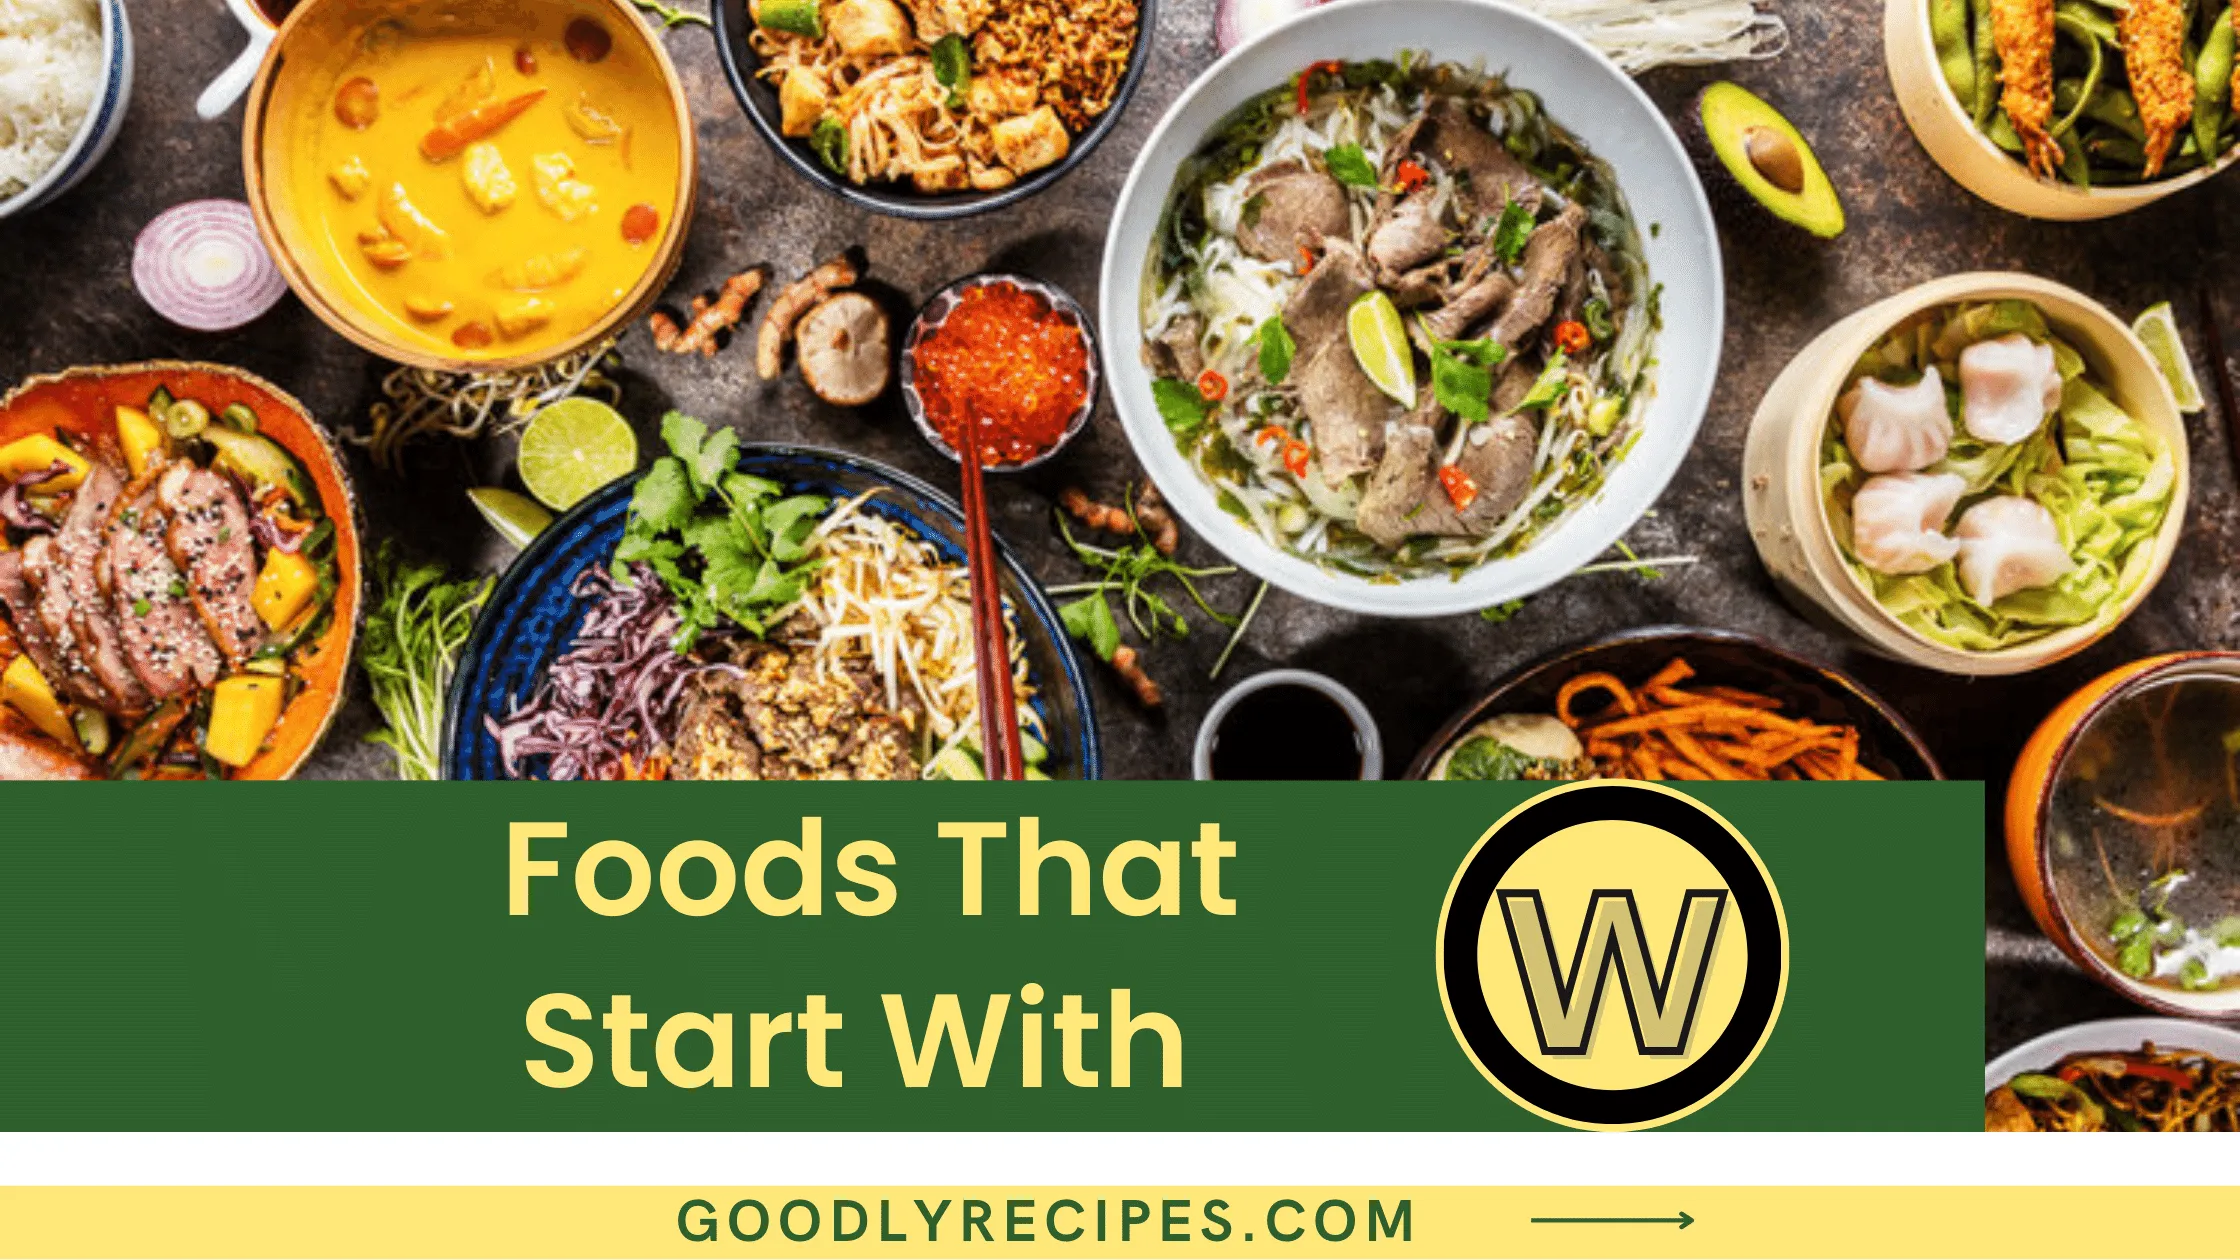 Foods That Start With W - Special Dishes